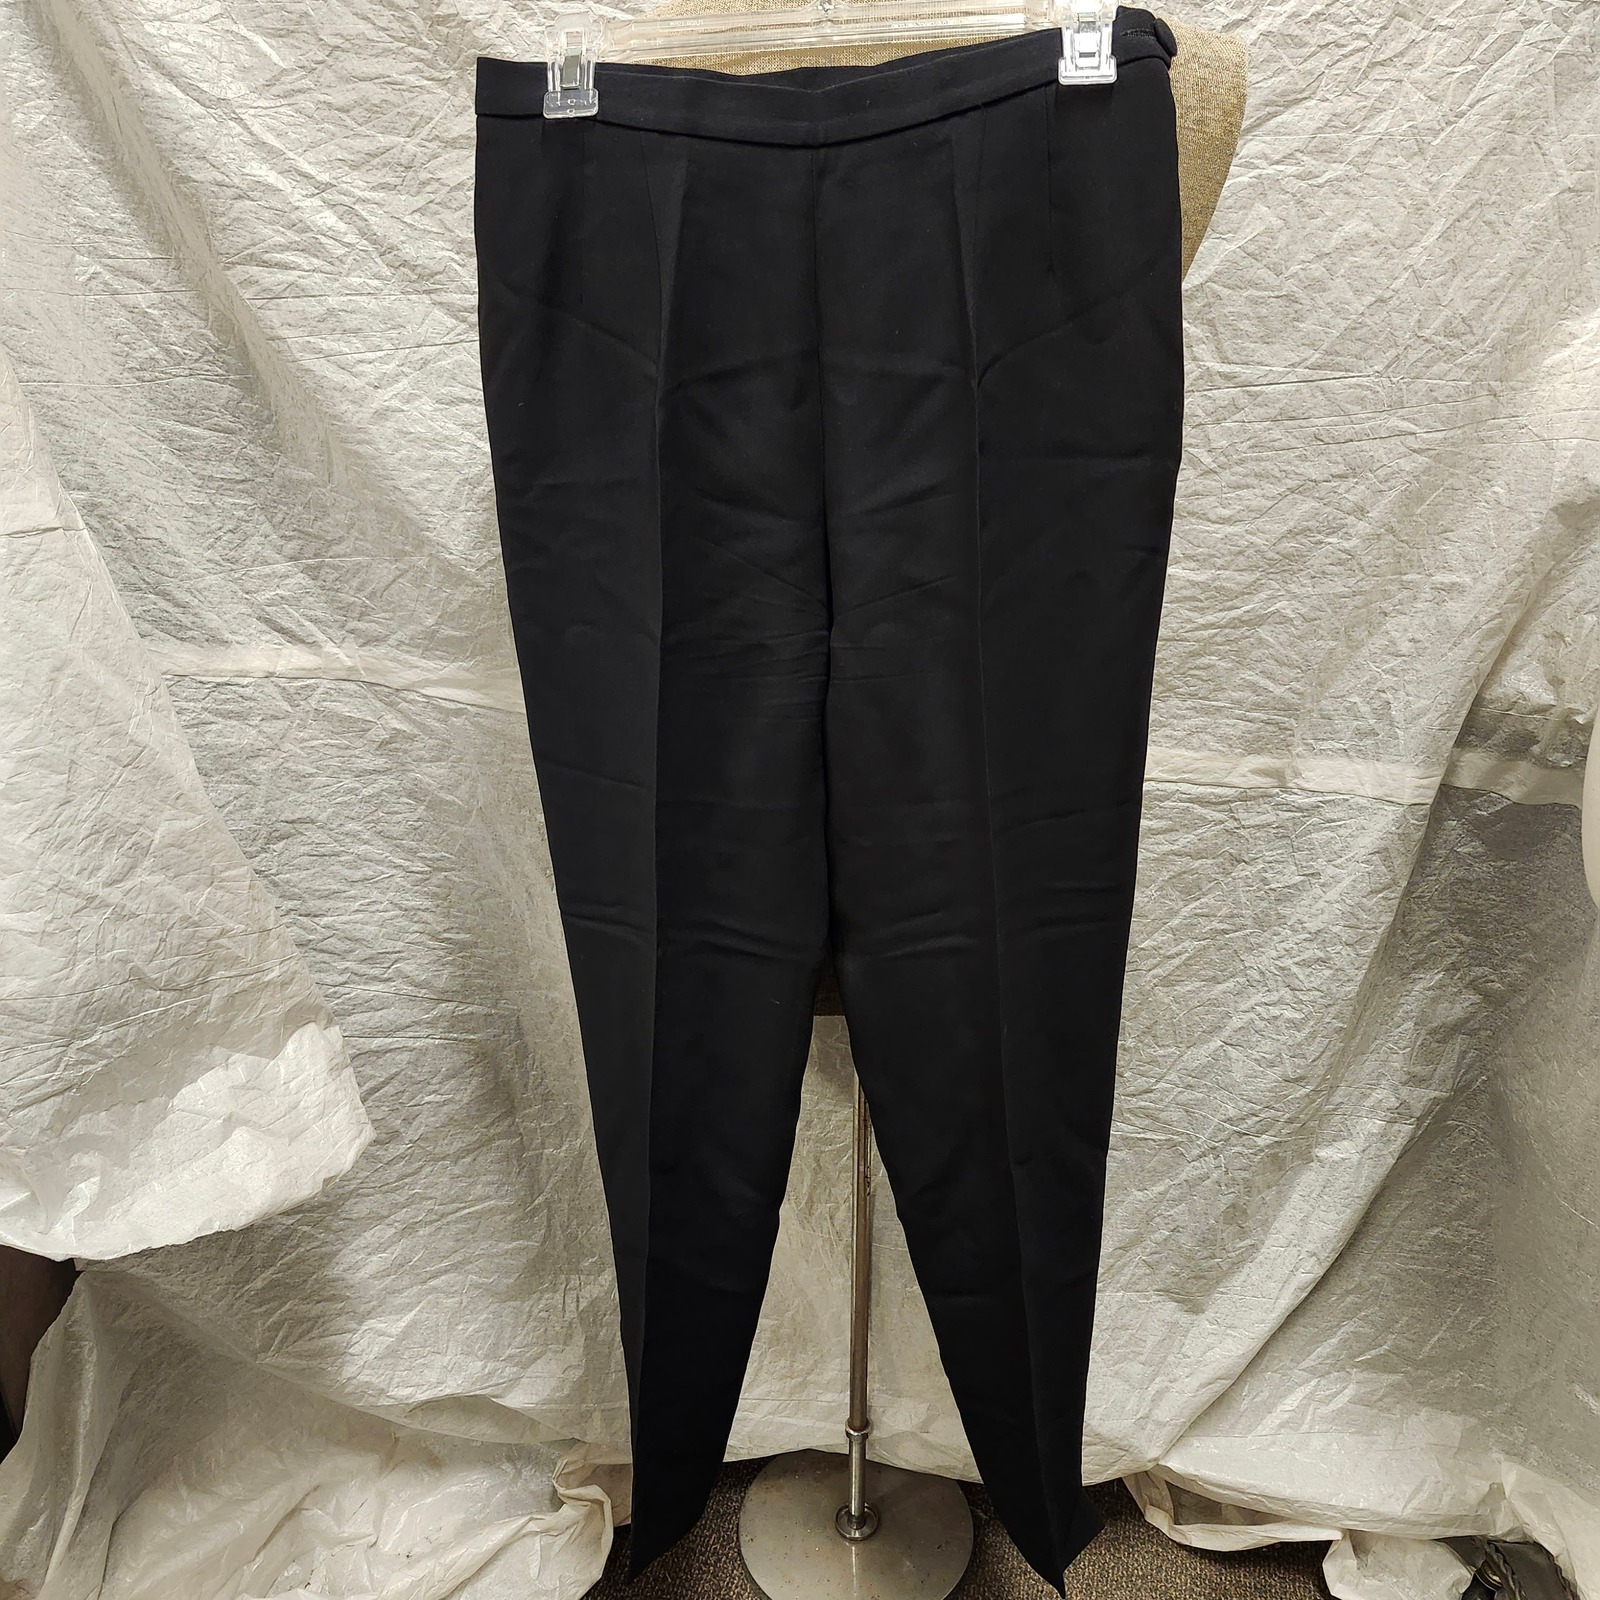 Primary image for Moschino Couture Women's Black Acetate/Rayon Pants, Size 10